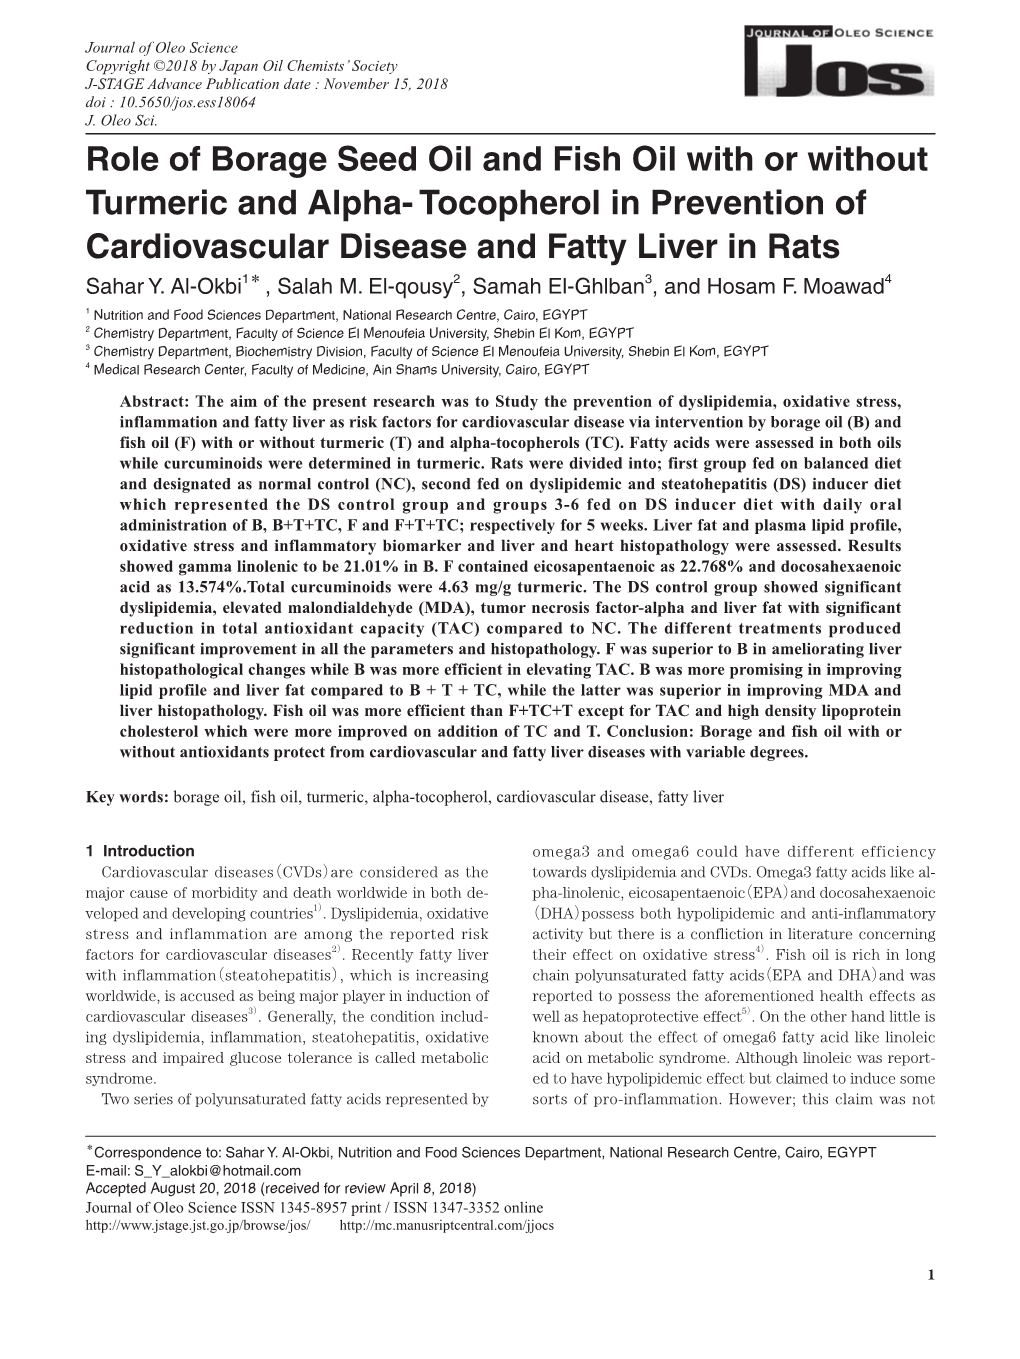 Role of Borage Seed Oil and Fish Oil with Or Without Turmeric and Alpha- Tocopherol in Prevention of Cardiovascular Disease and Fatty Liver in Rats Sahar Y